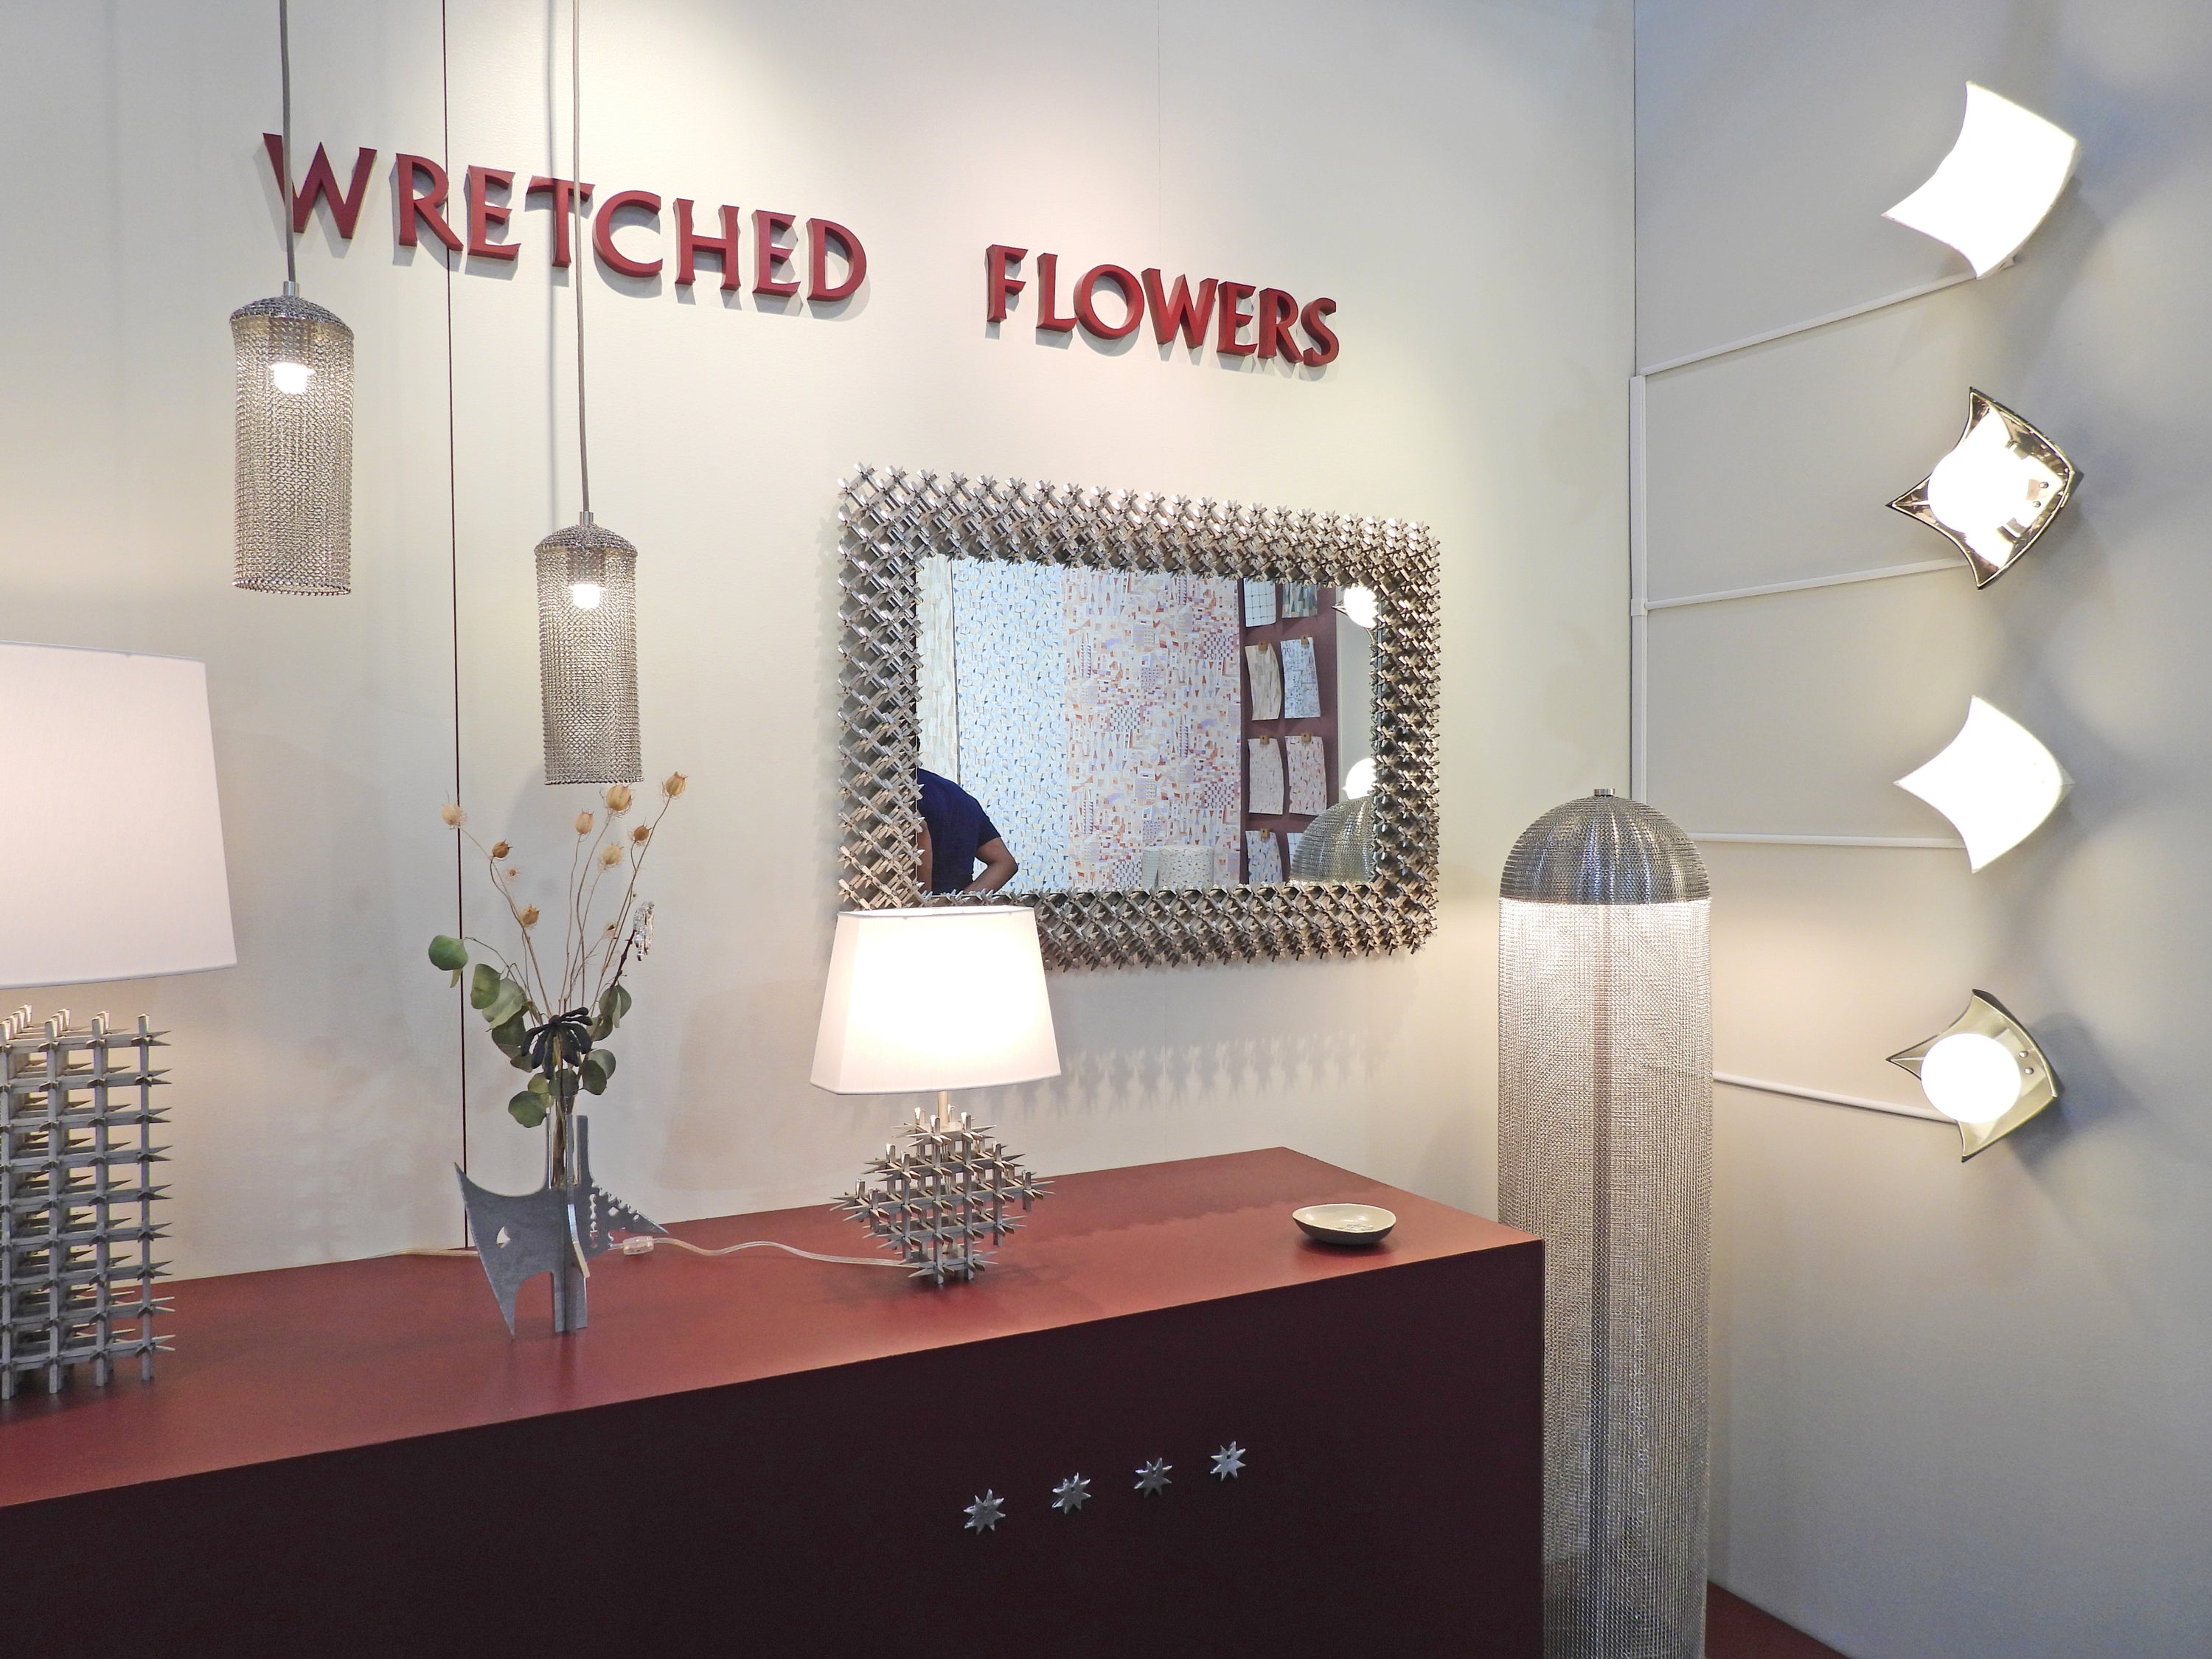 Introducing our Newest Collection - Dwell's "Favorite" of ICFF